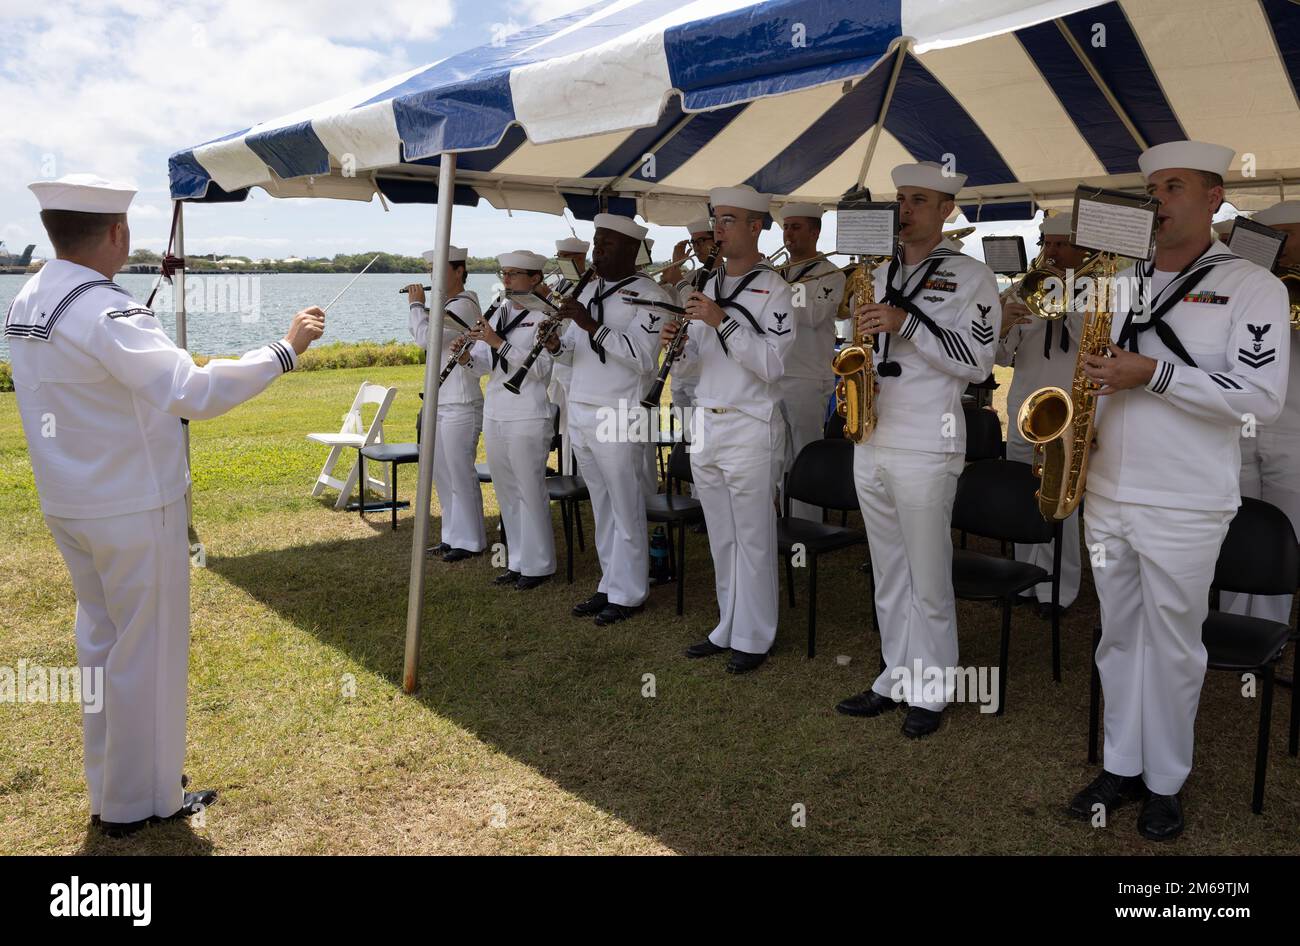 220421-N-XM133-0018 EWA BEACH, Hawaii (April 21, 2022) Sailors with the U.S. Pacific Fleet Band perform during the change of command ceremony, April 21, 2022. Capt. John S. Barsano relieved Capt. Brett Thompson as commander, Navy Munitions Command Pacific East Asia Division during the official ceremony. Stock Photo